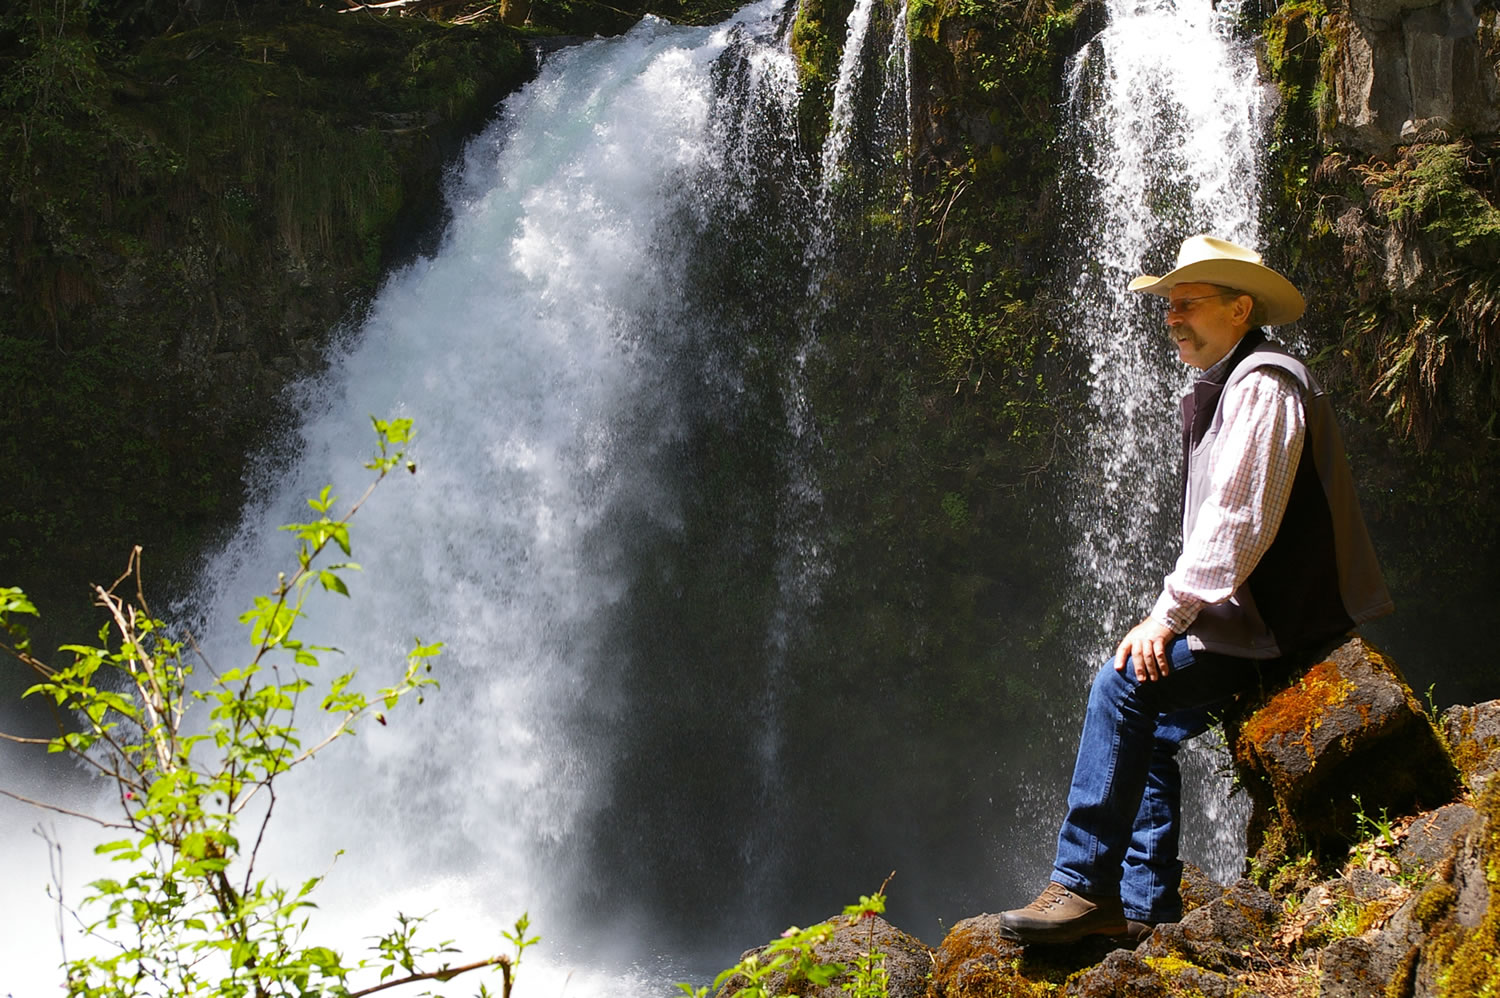 Bill Richardson of the Rocky Mountain Elk Foundation takes a break at Kalama Falls in eastern Cowlitz County.